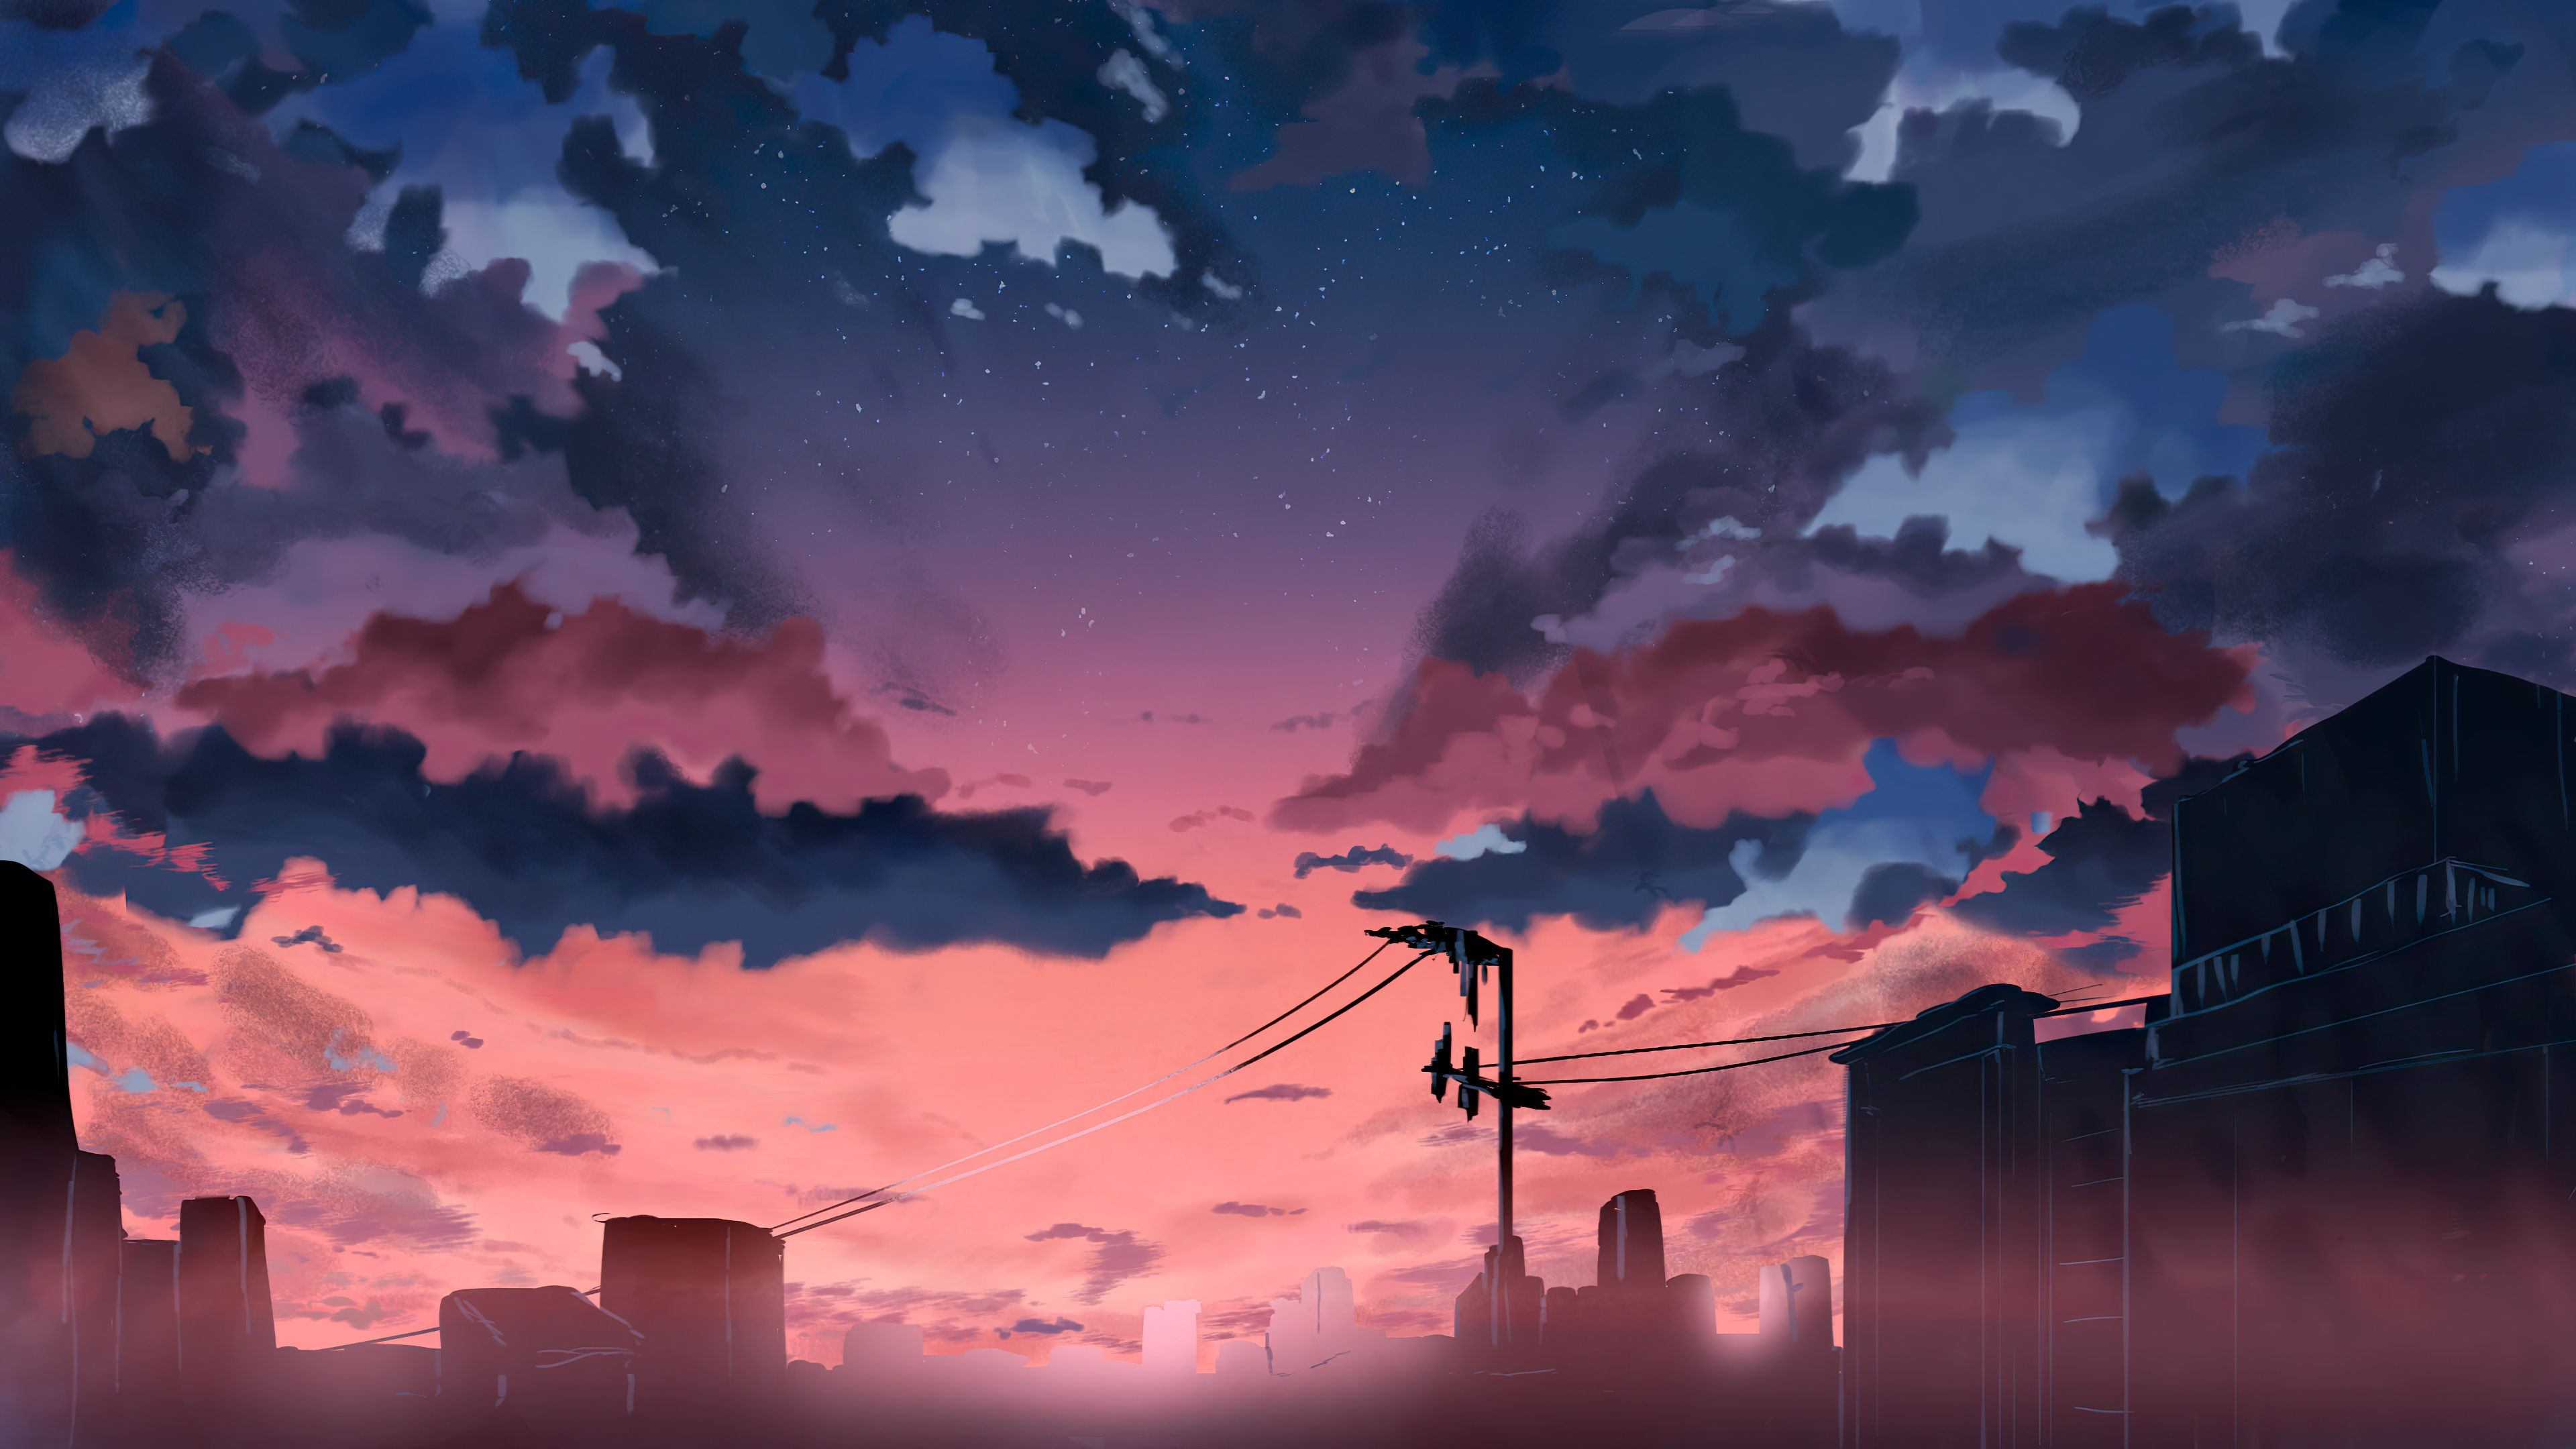 A painting of the sky with clouds and buildings - 3840x2160, anime